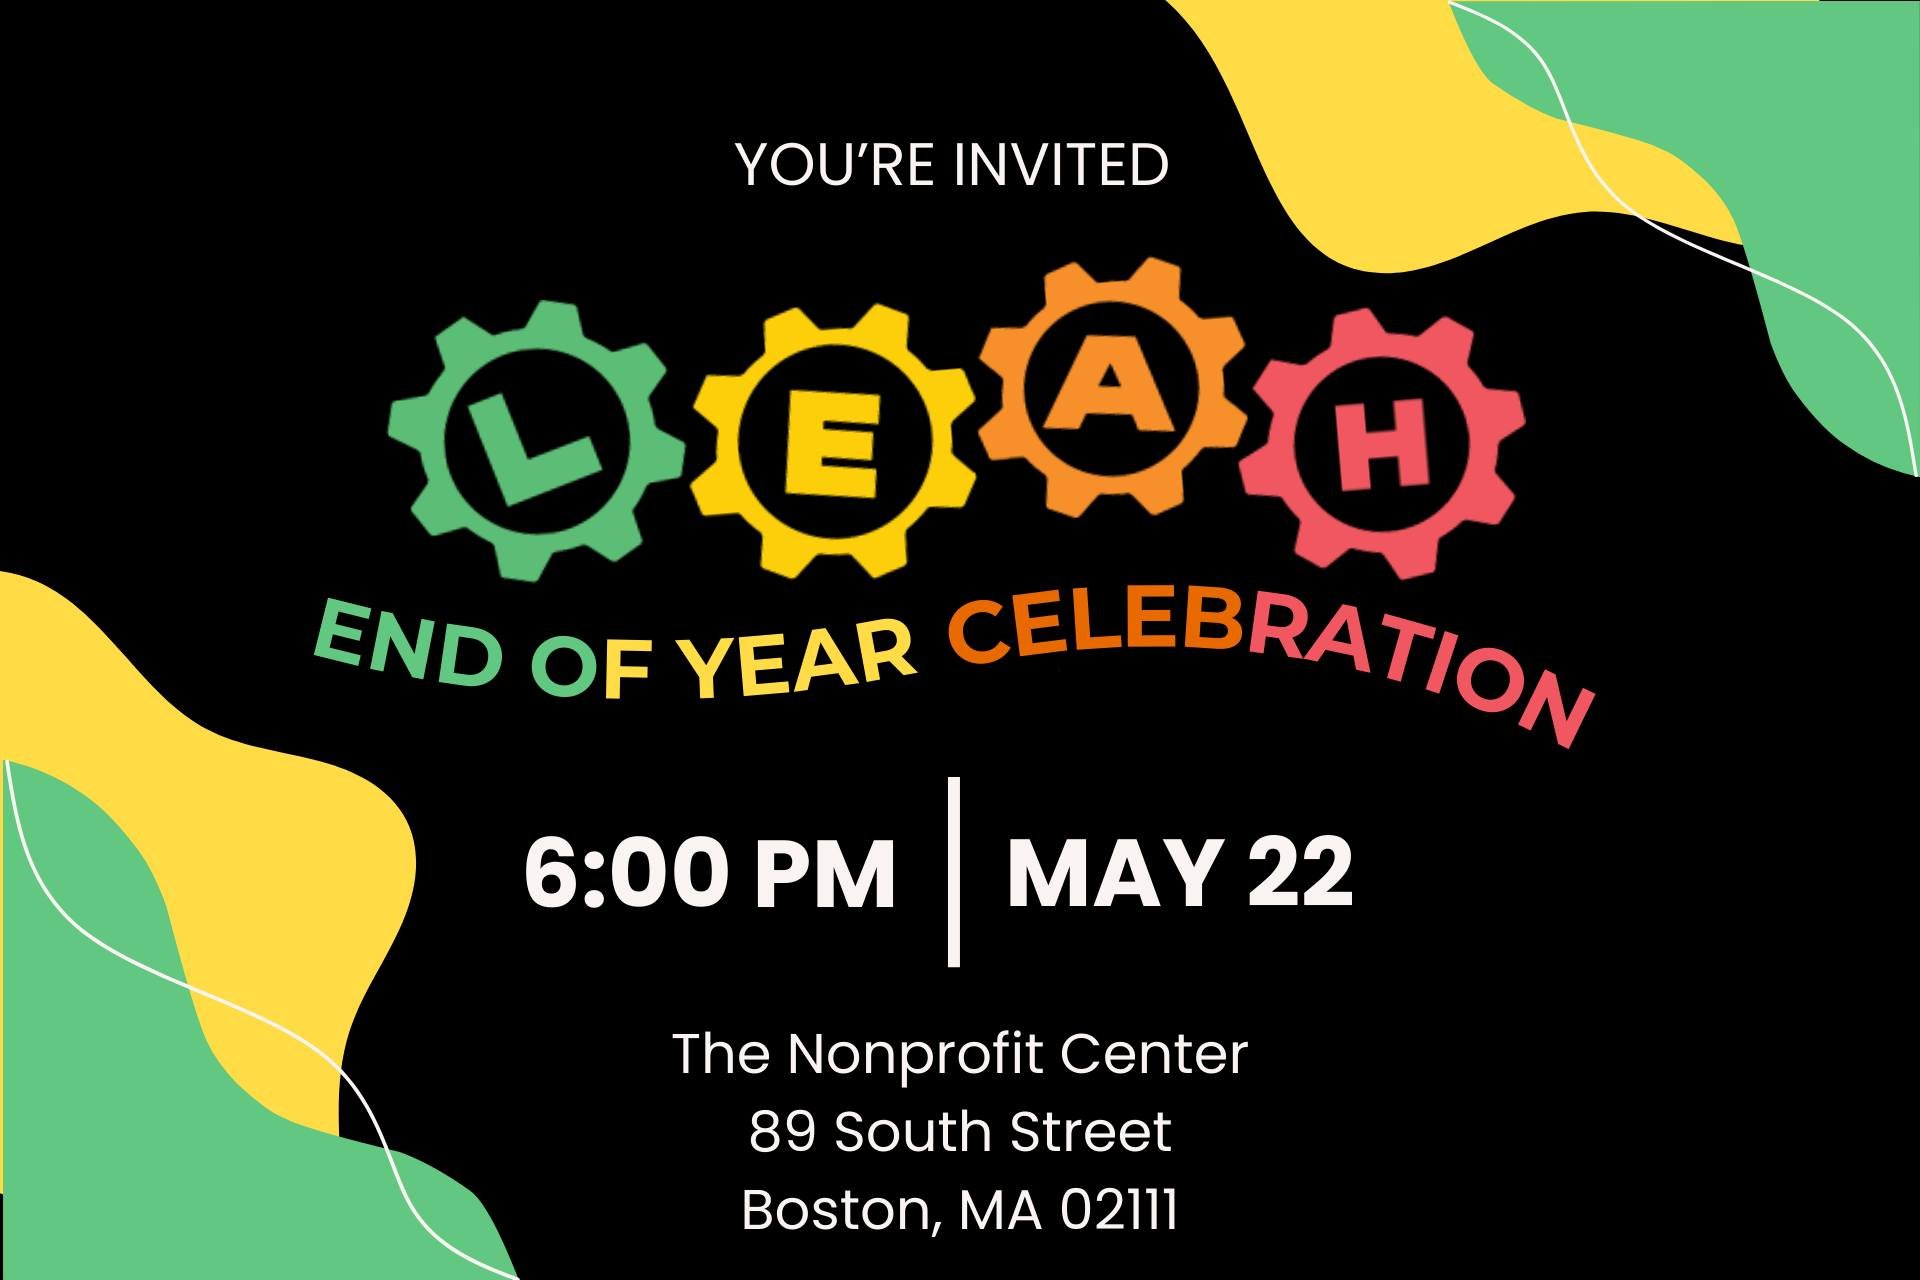 You are invited! Join LEAH youth, alumni, staff, funders, family, and supporters as we celebrate LEAH&rsquo;s Youth Leaders and recognize our graduating seniors.

RSVP for the LEAH End of Year Celebration at:

https://forms.office.com/Pages/ResponseP